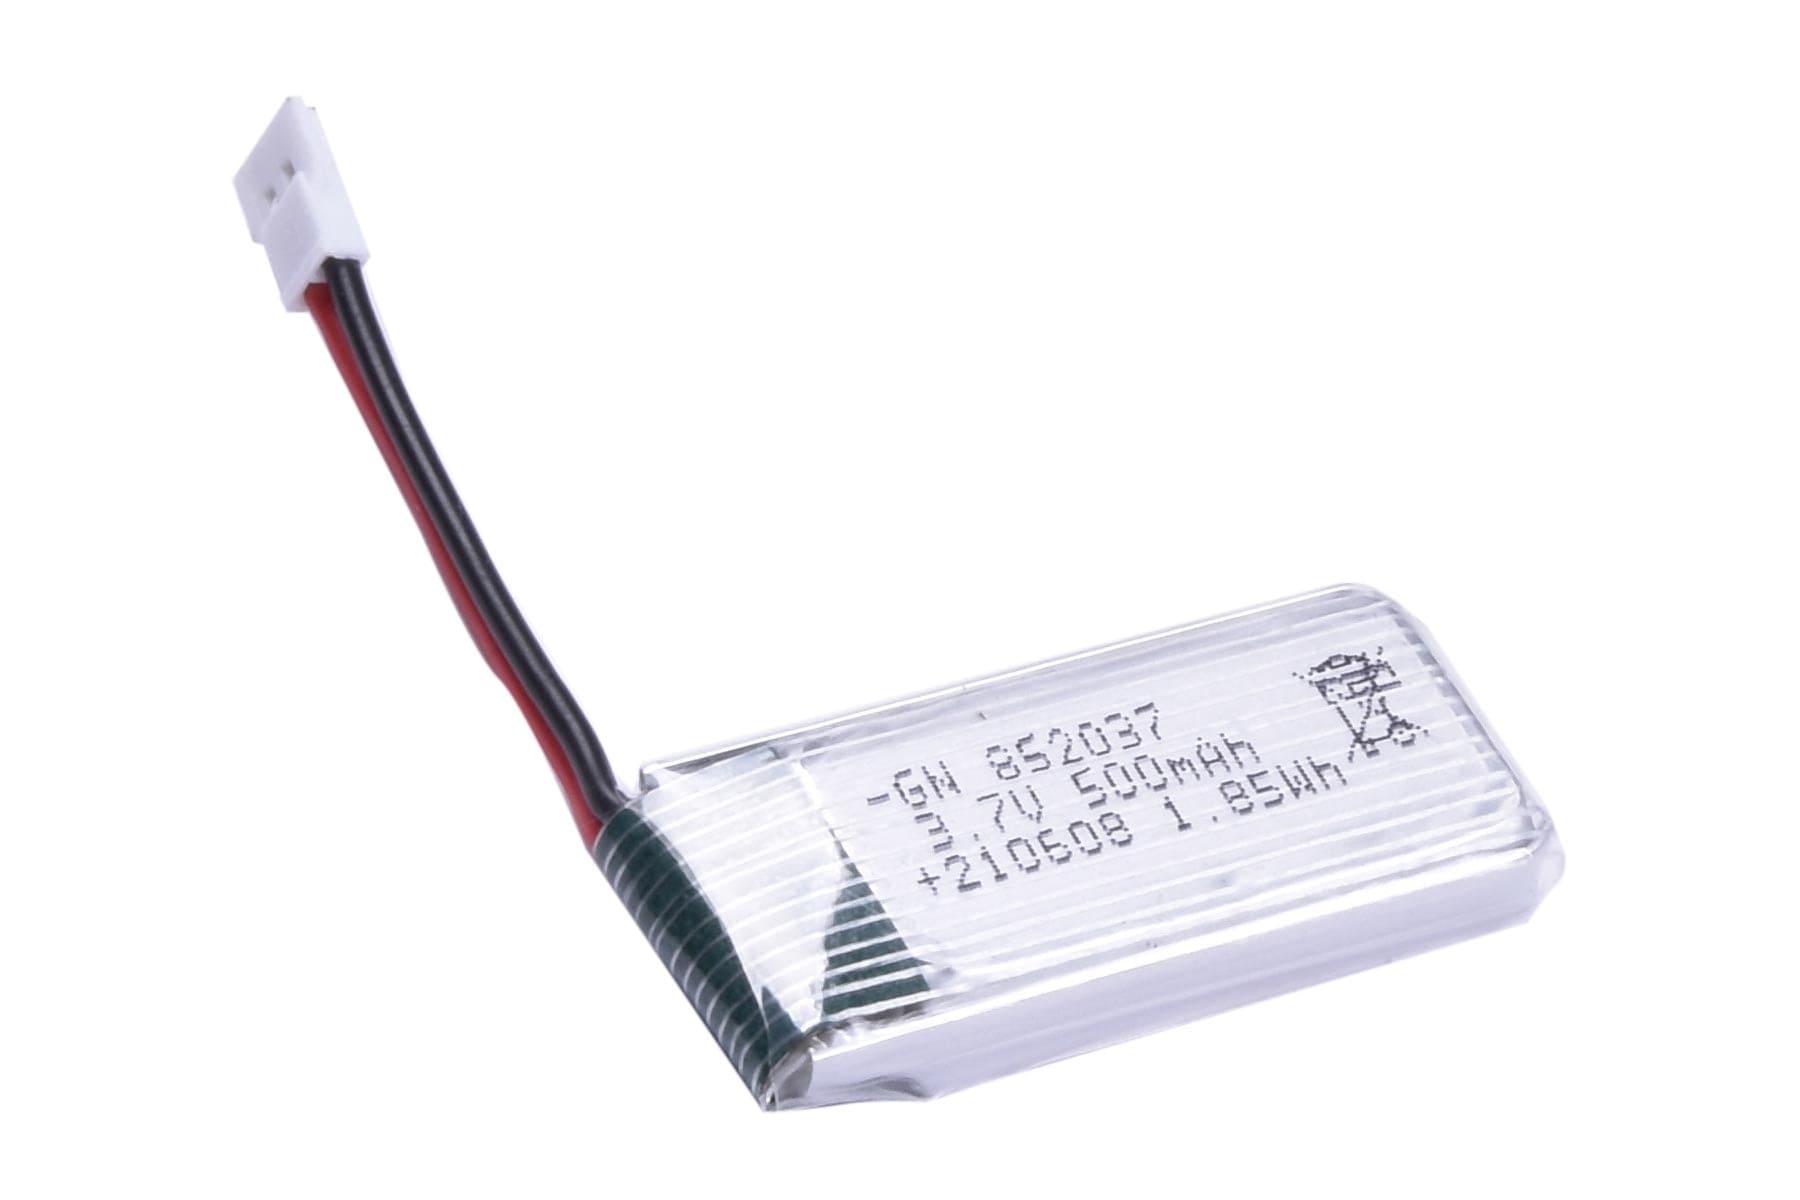 Skynetic 500mAh 1S 3.7V LiPo Battery with Micro Connector SKY1050-009